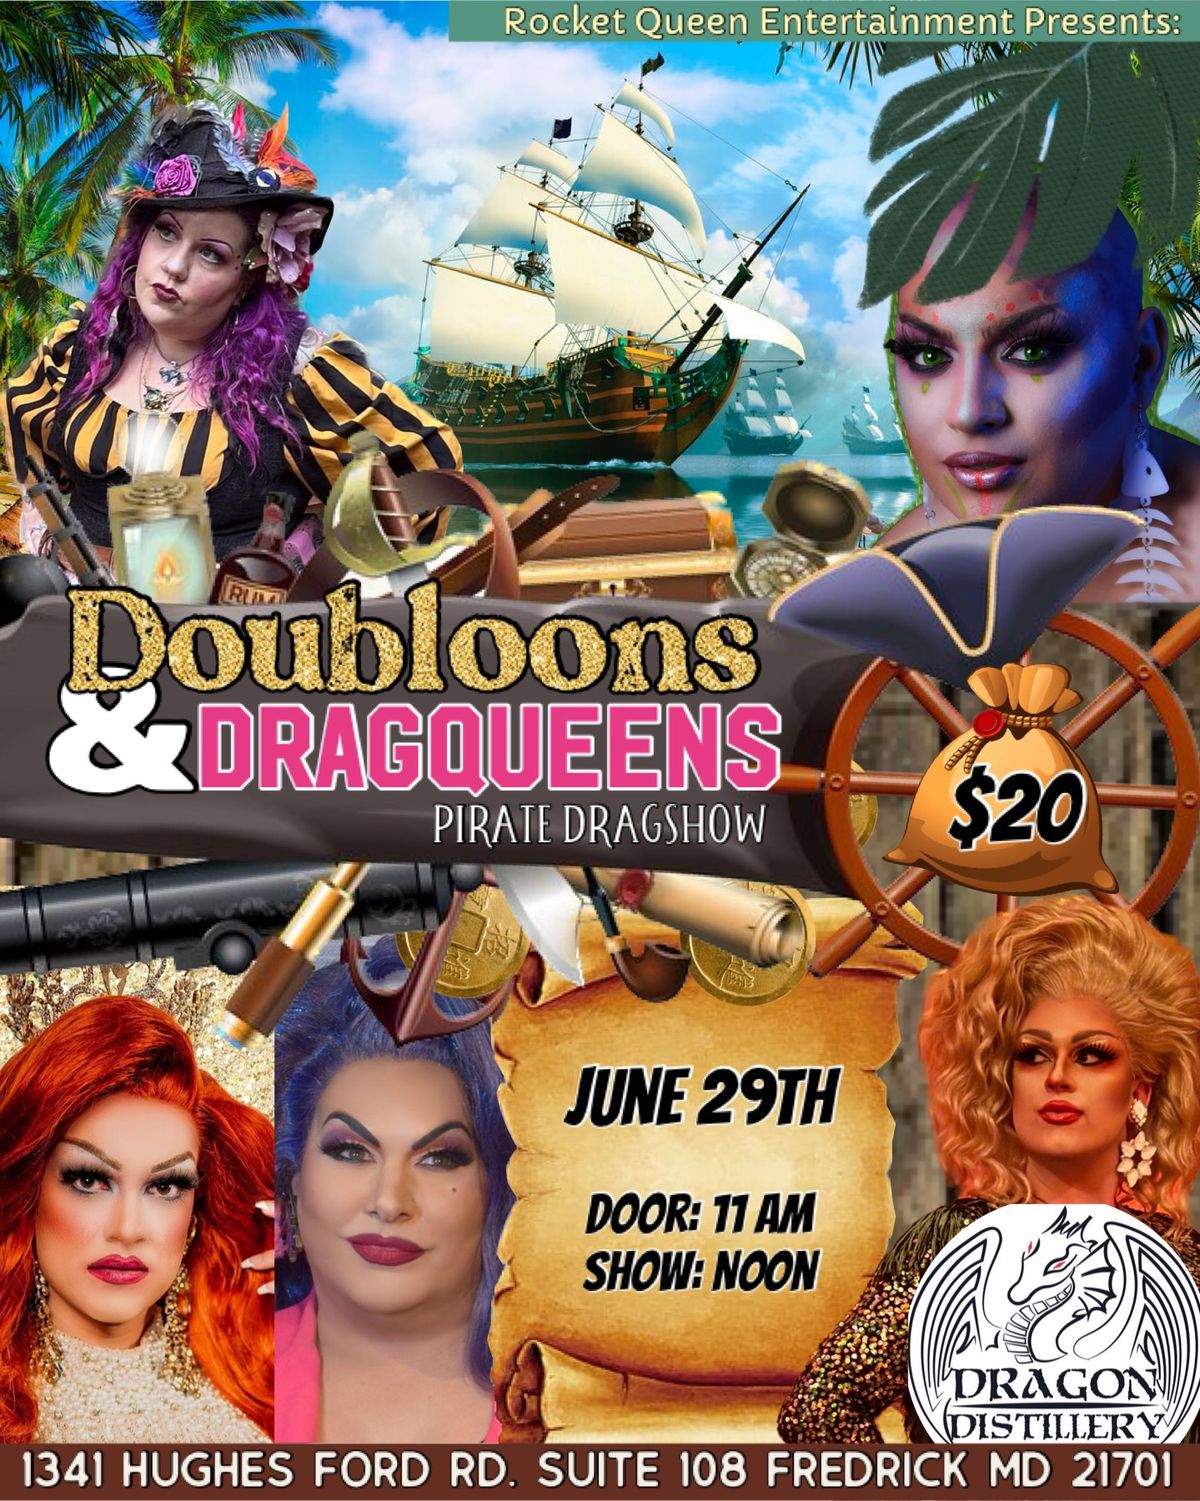 Doubloons and dragqueens @dragon distillery 